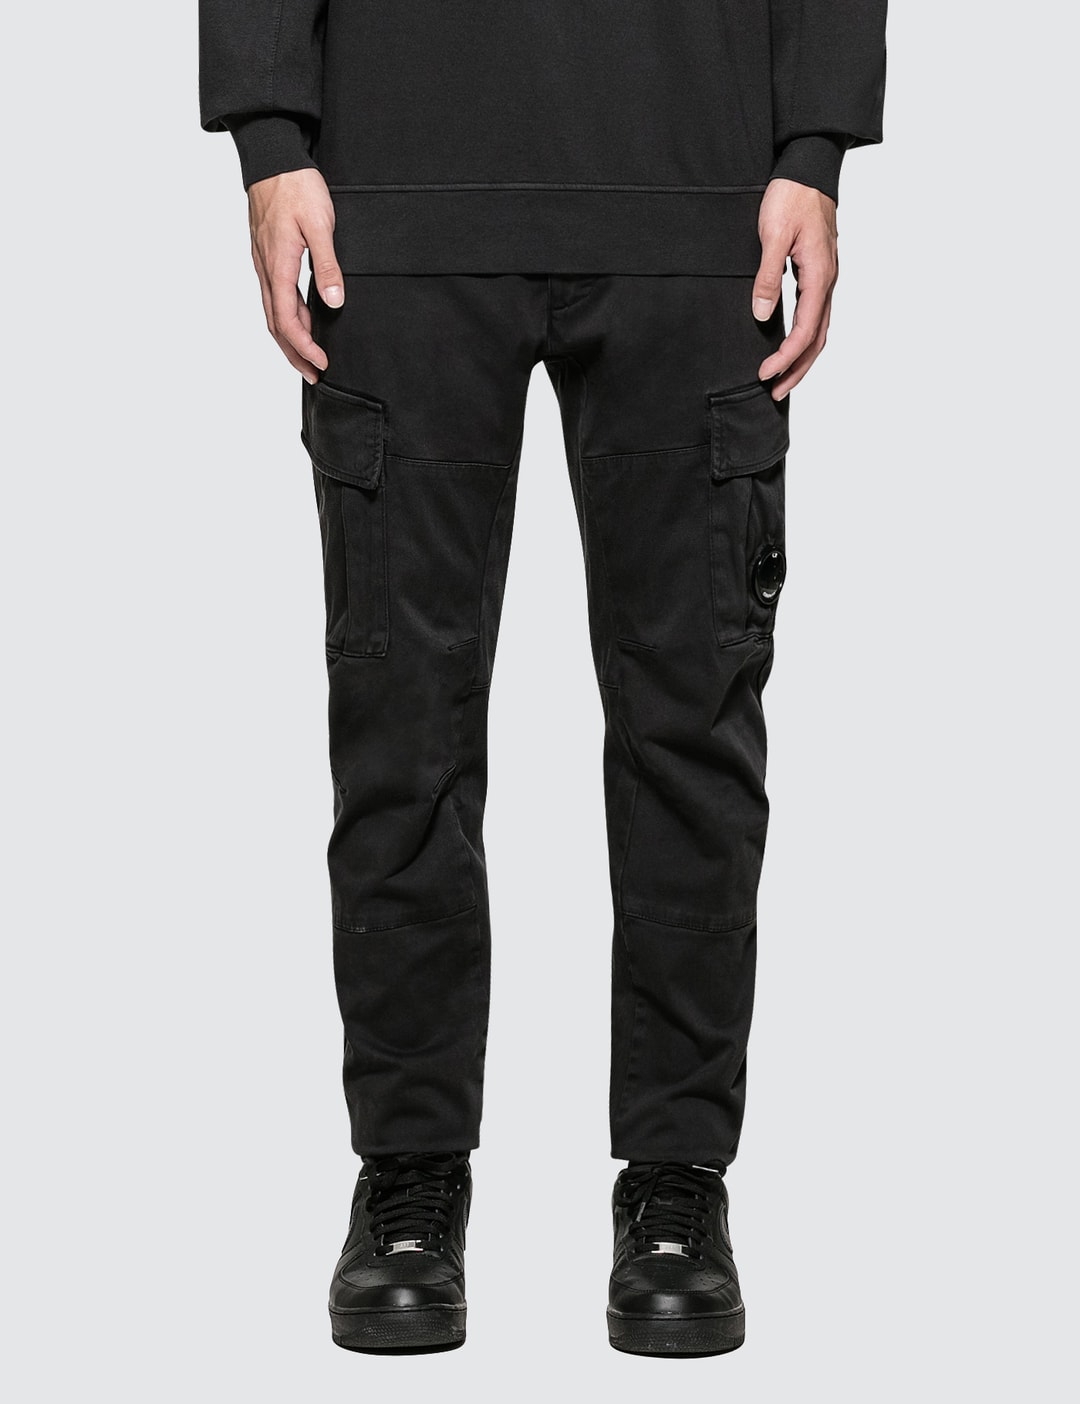 C.P. Company - Cargo Pants | HBX - Globally Curated Fashion and ...